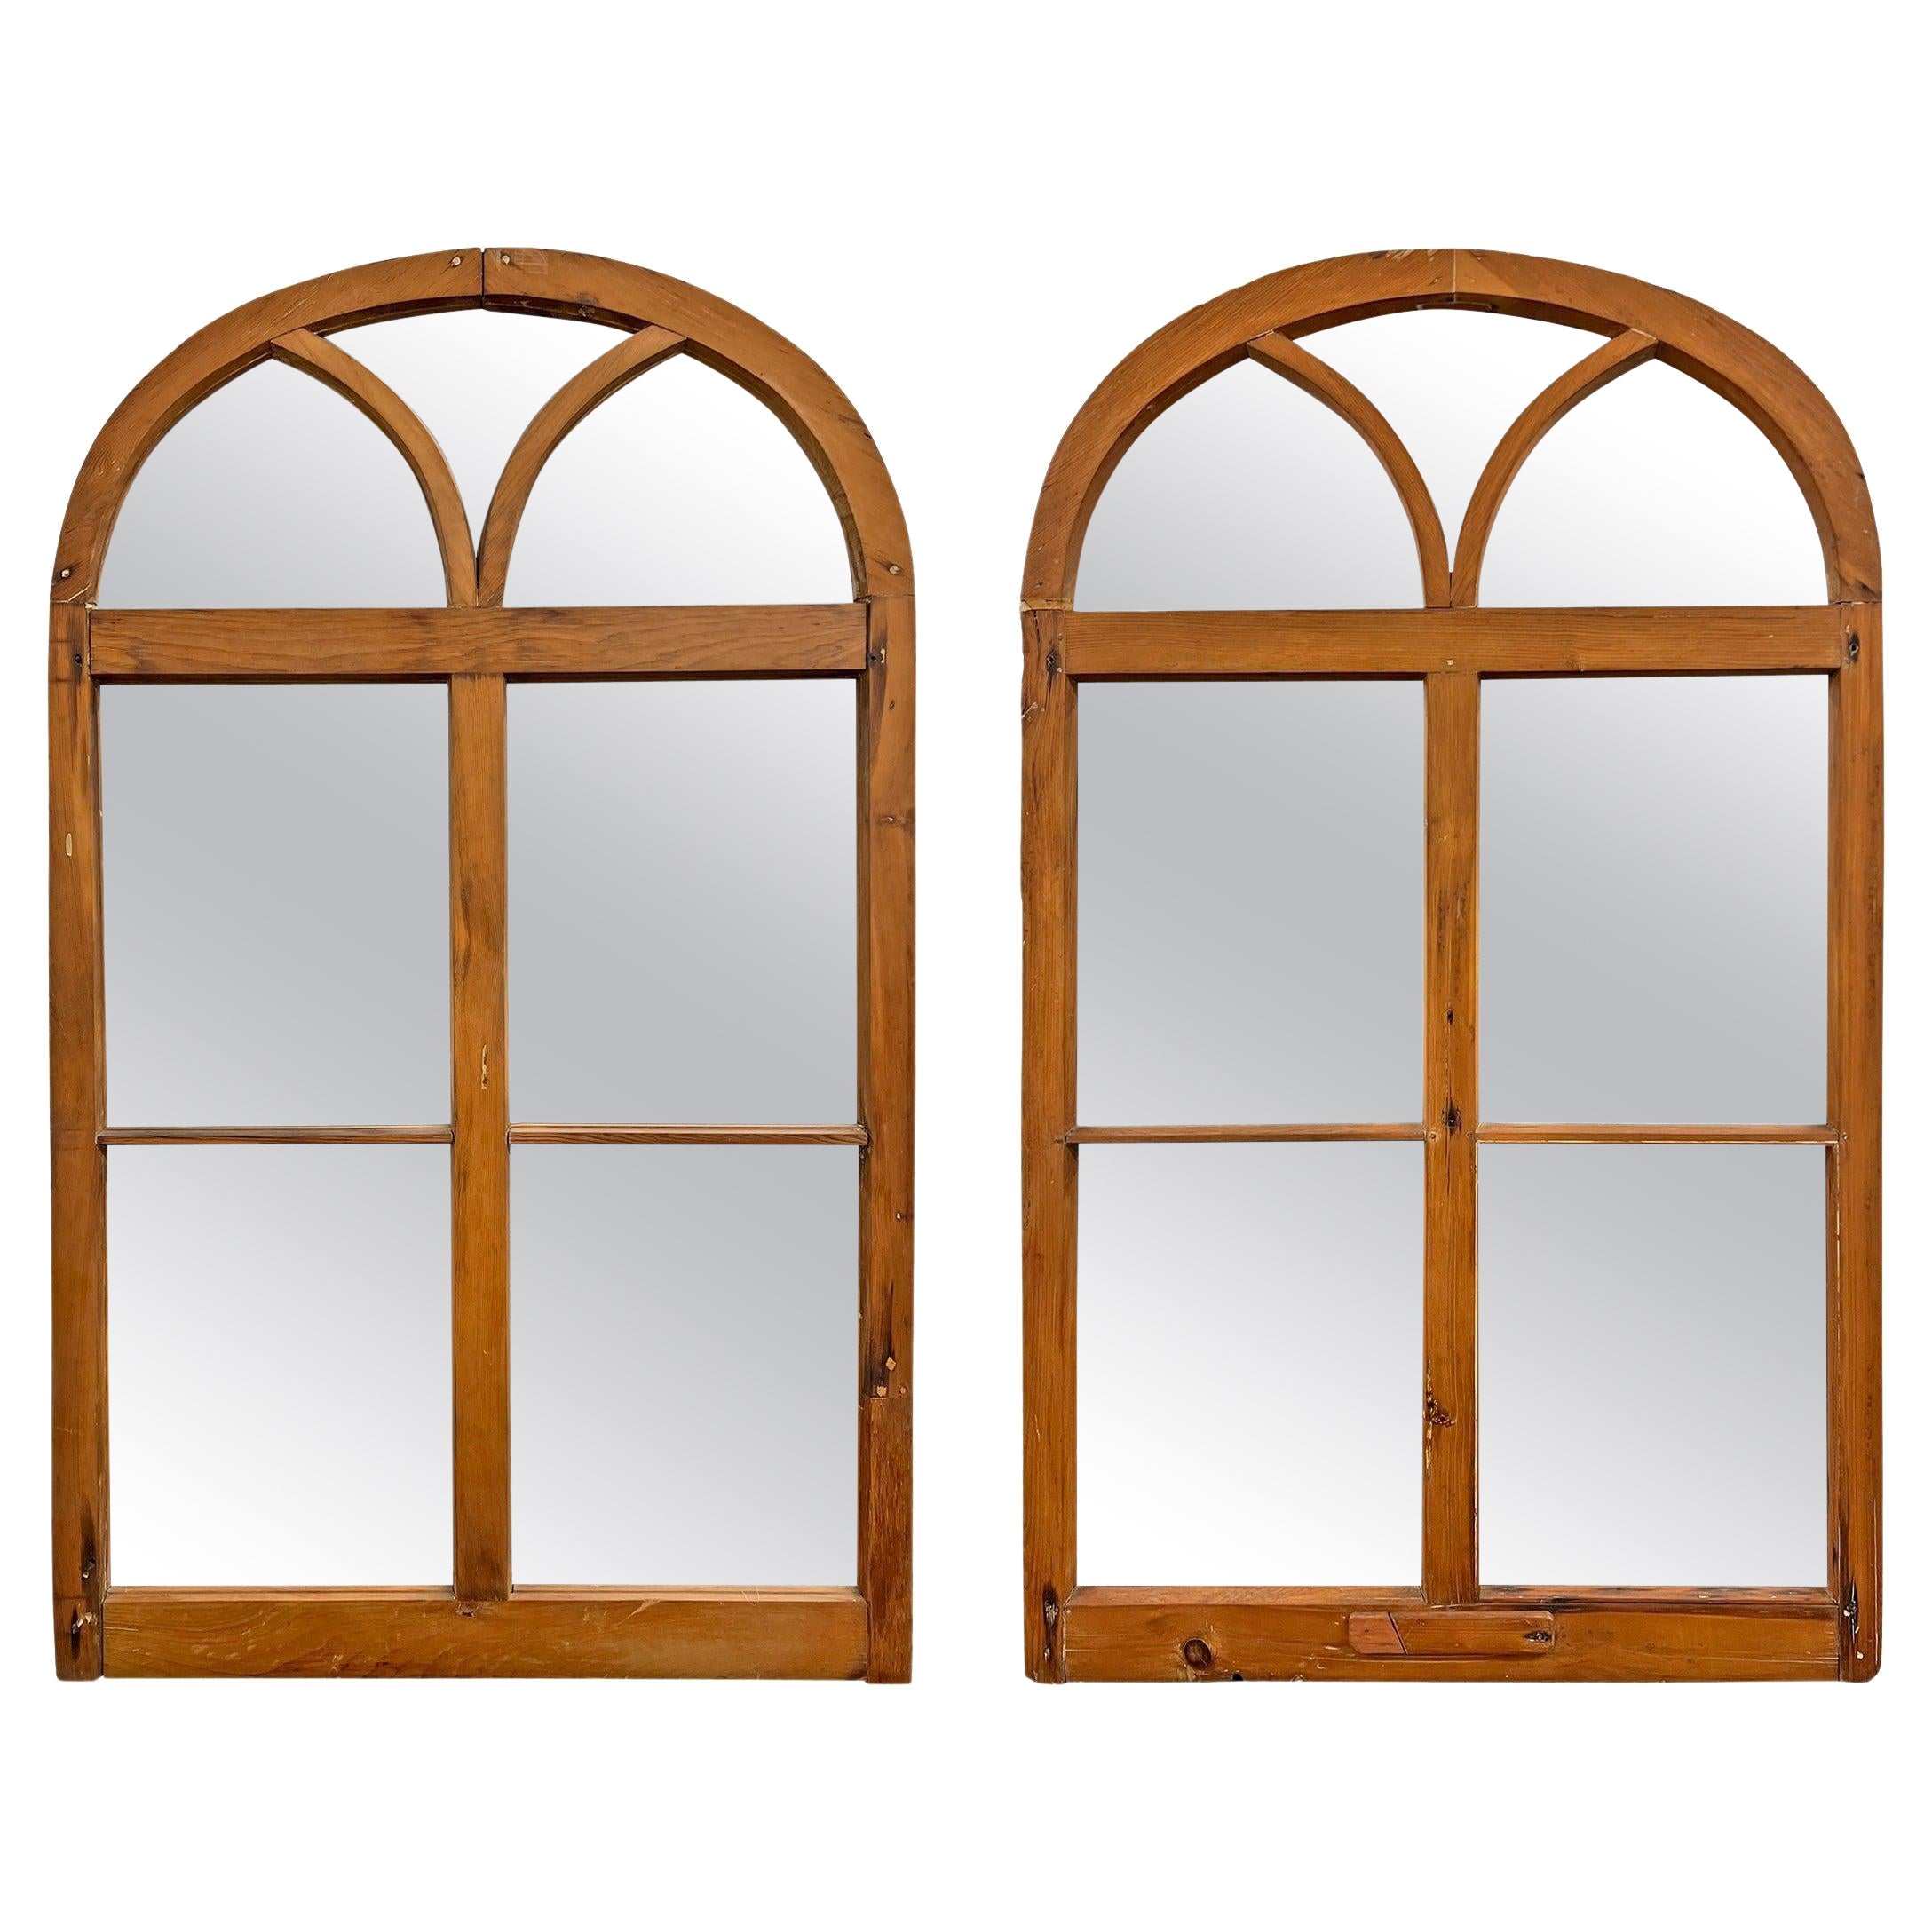 Canadian Pier Mirrors and Console Mirrors